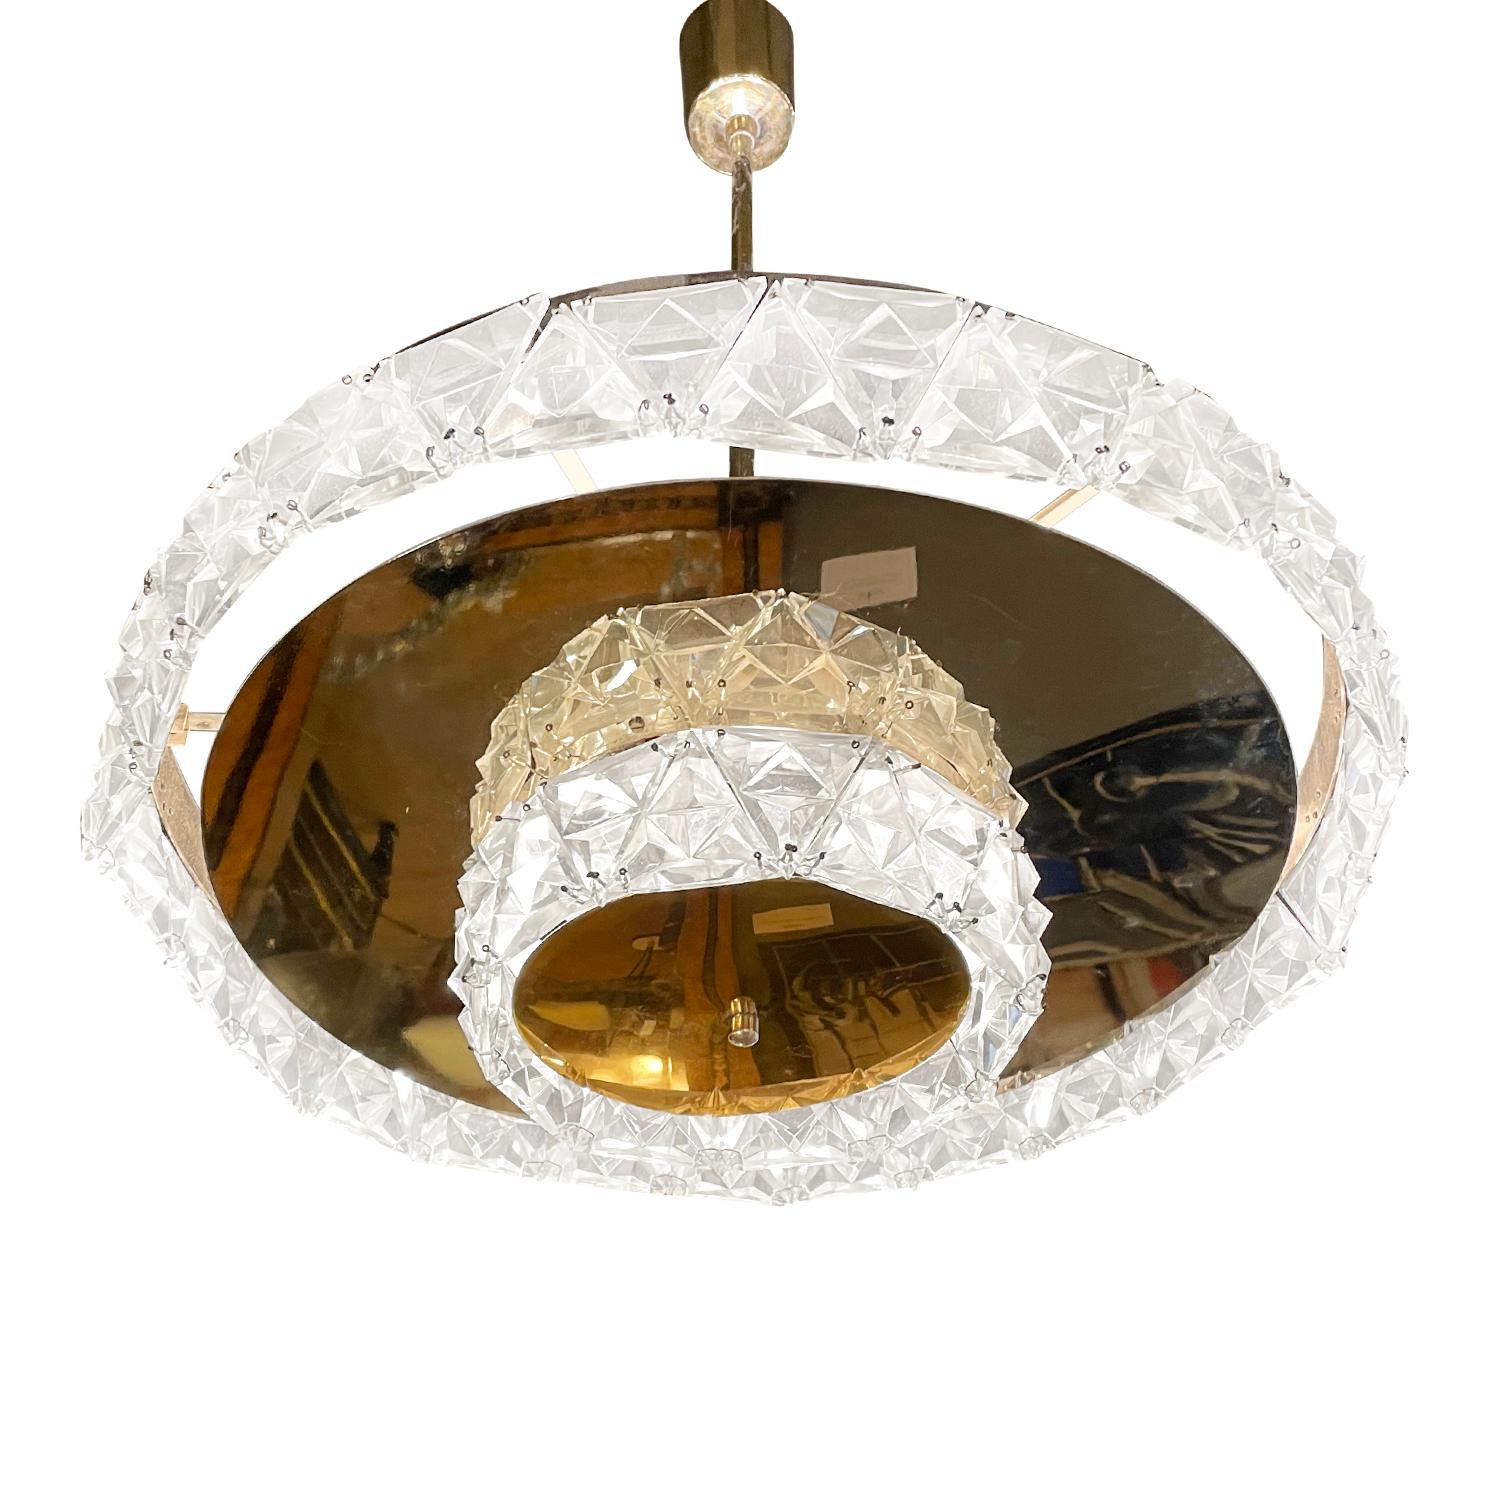 20th Century Swedish Orrefors Glass Ceiling Lamp, Pendant by Carl Fagerlund For Sale 2